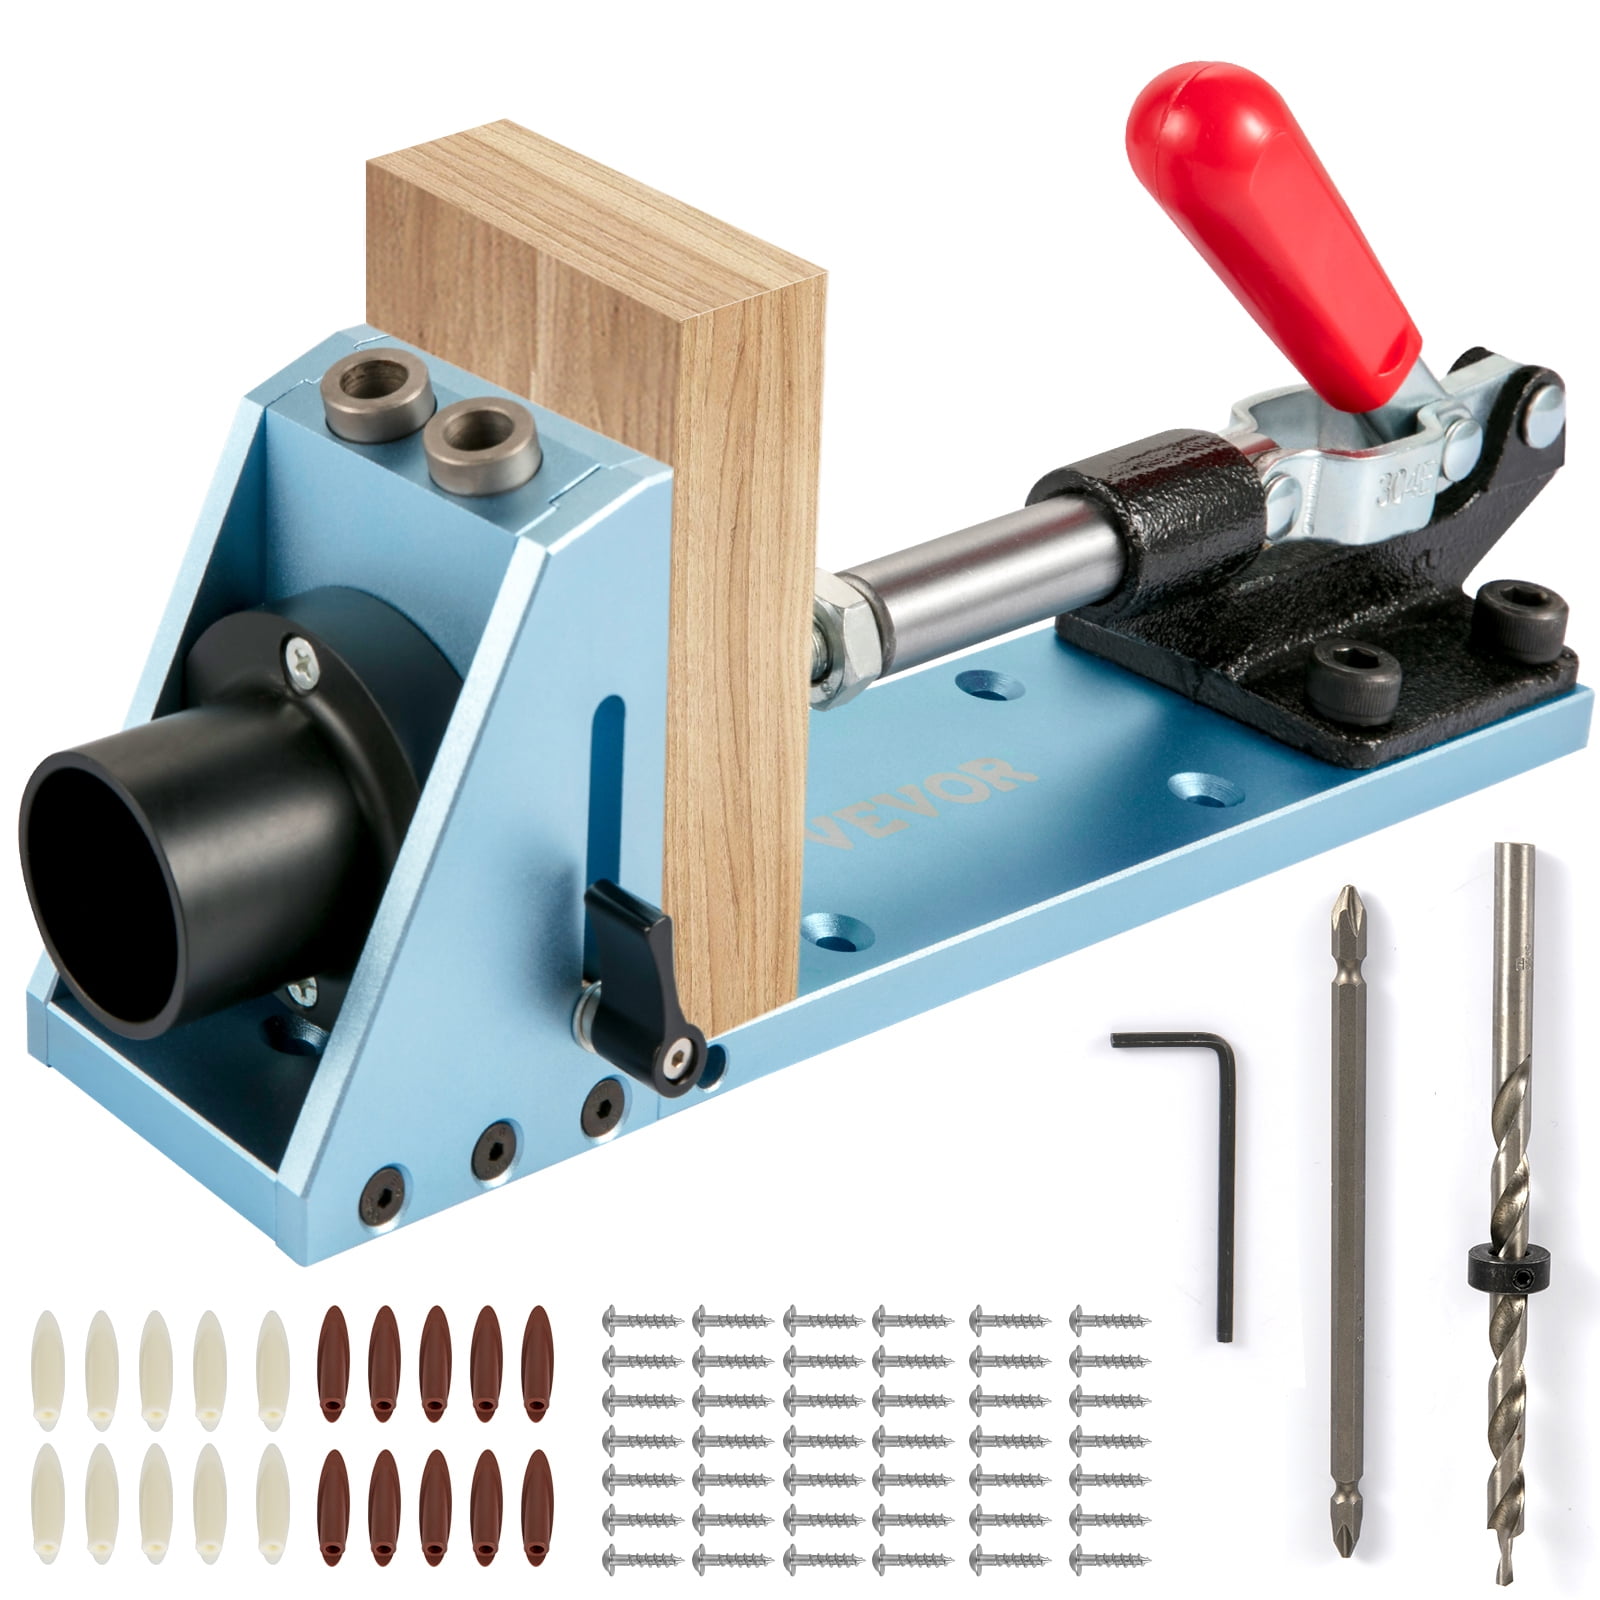 1 set Pocket Hole Screw Jig with Dowel Drill Set Carpenters Wood Joint Tool AHS 